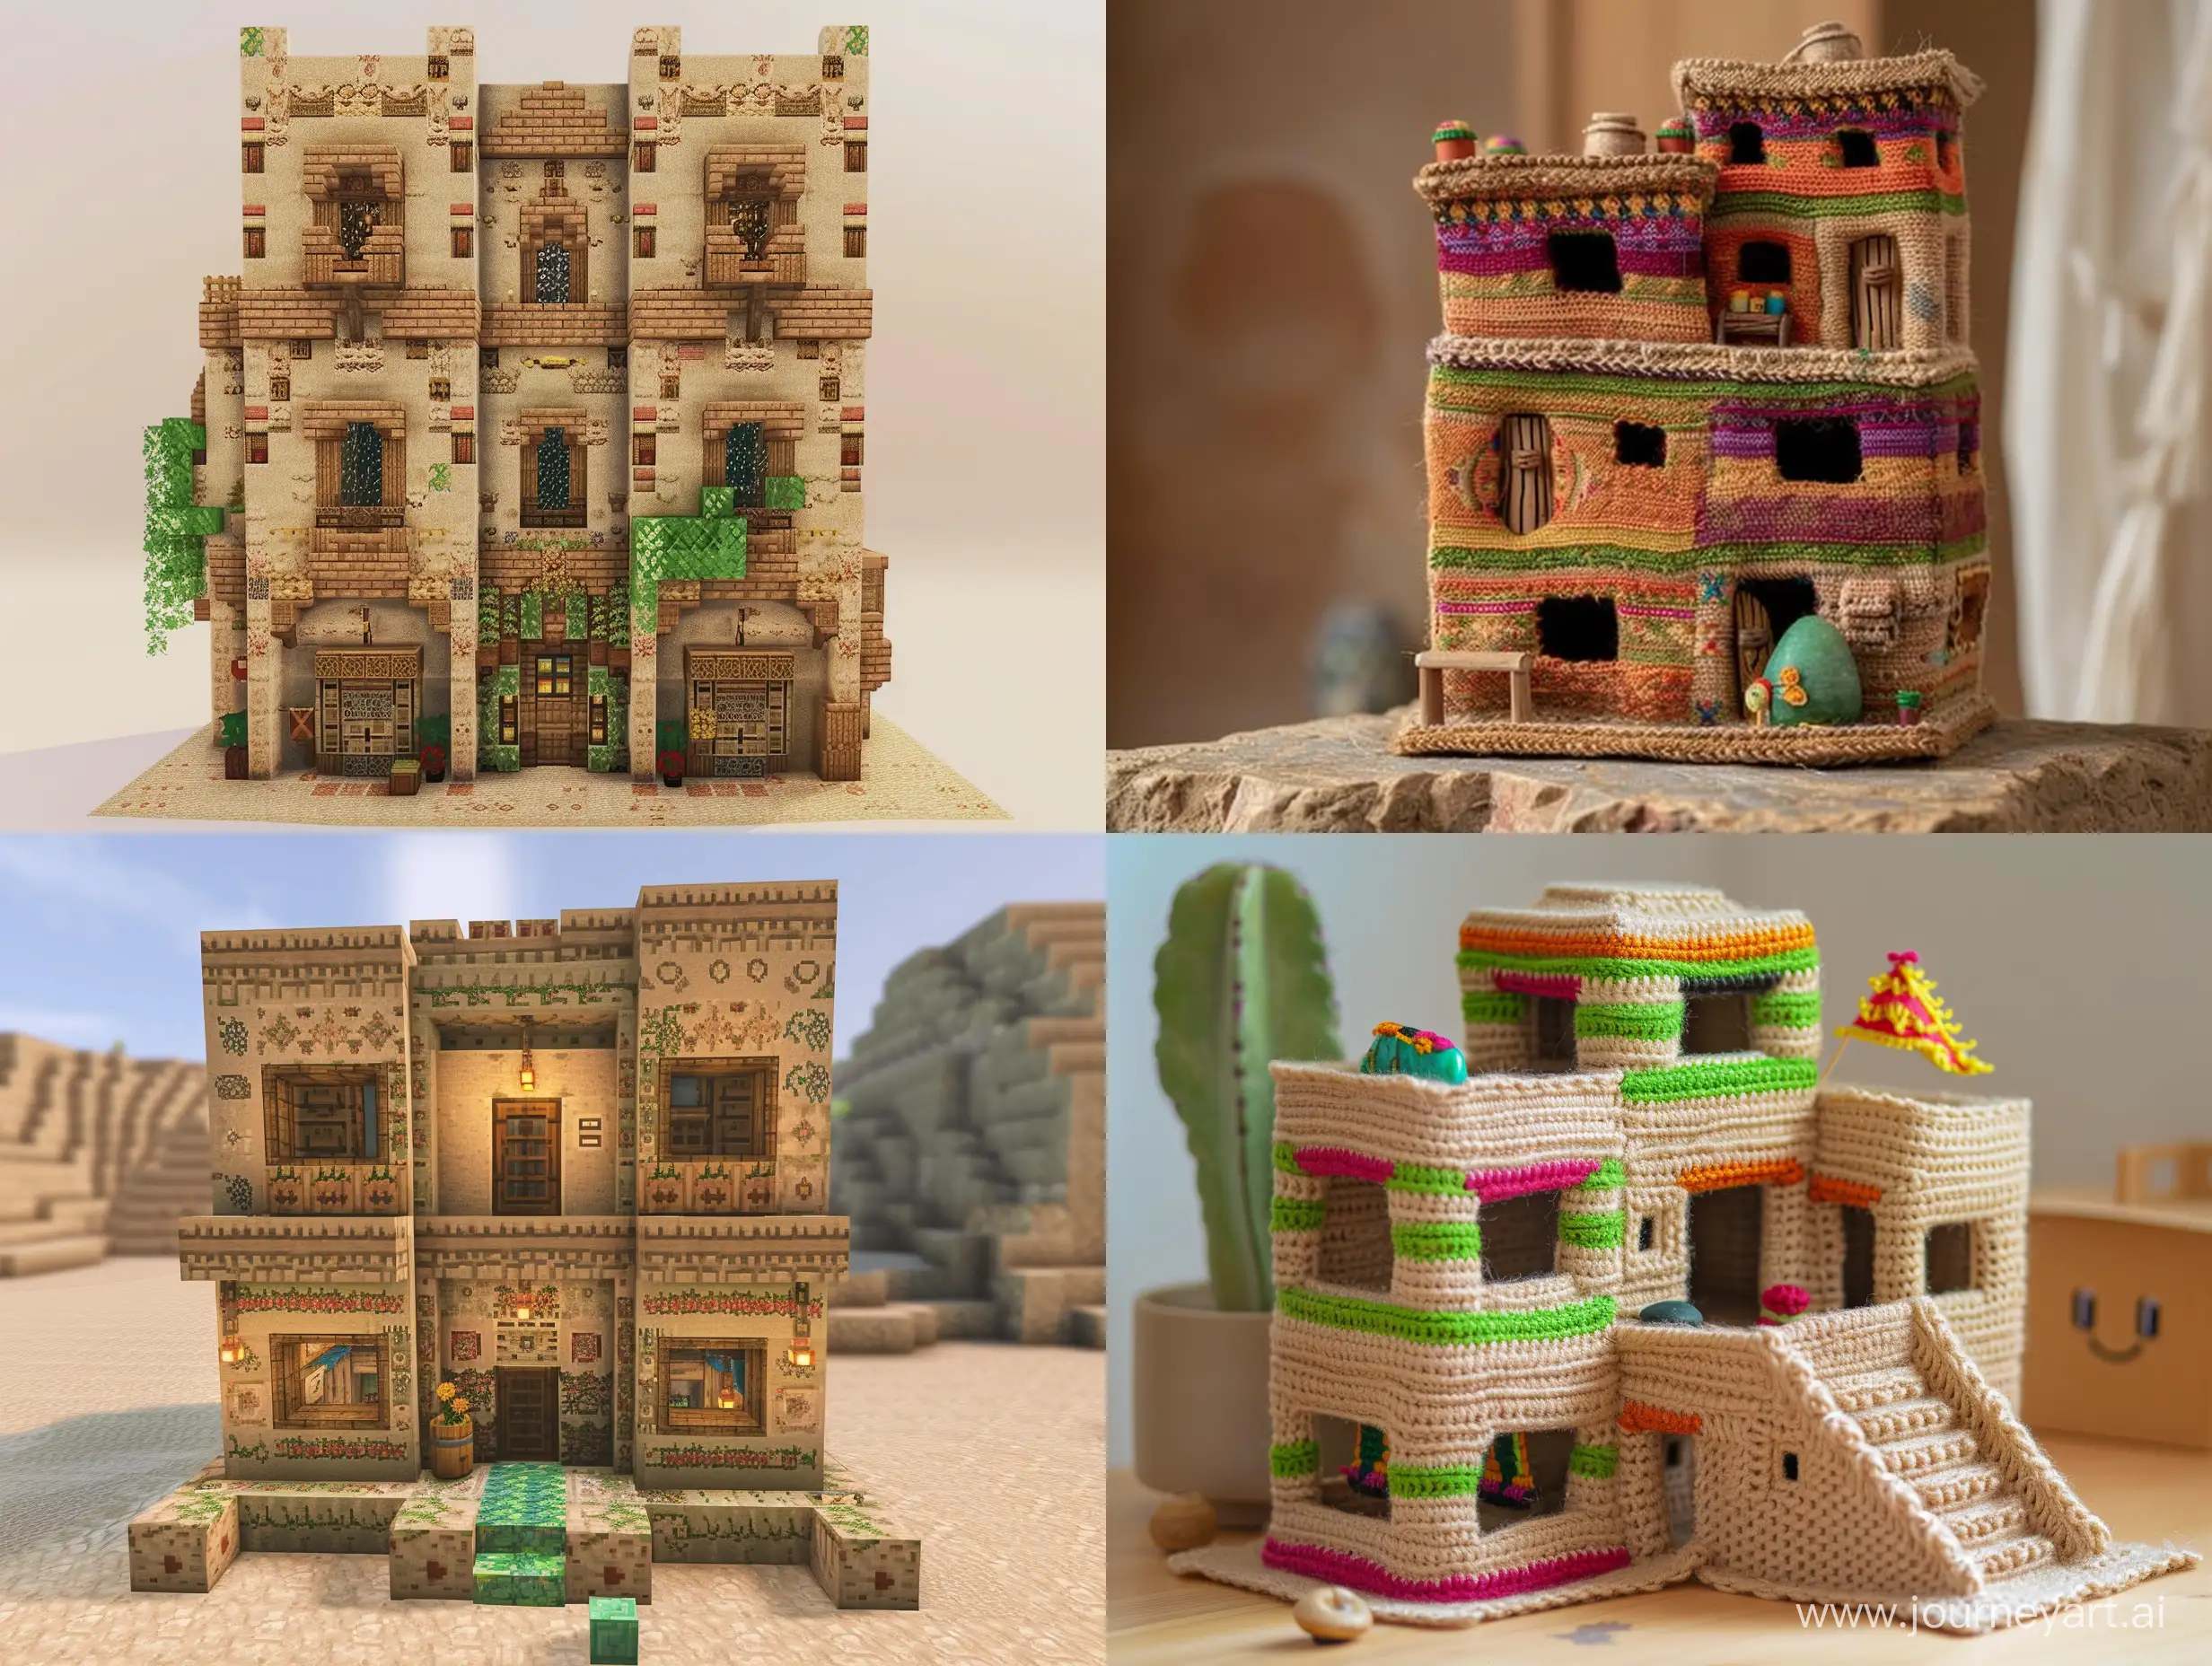 4 storey building in afghan style with a small green stone similar to a little room